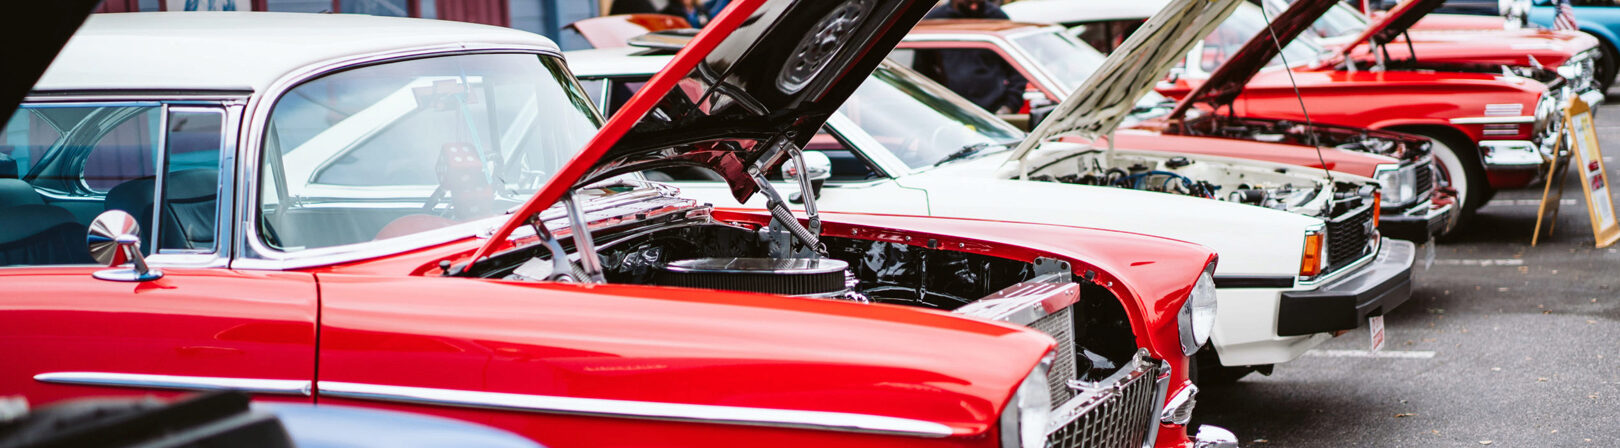 Weekly Classic Car Show & Cruise